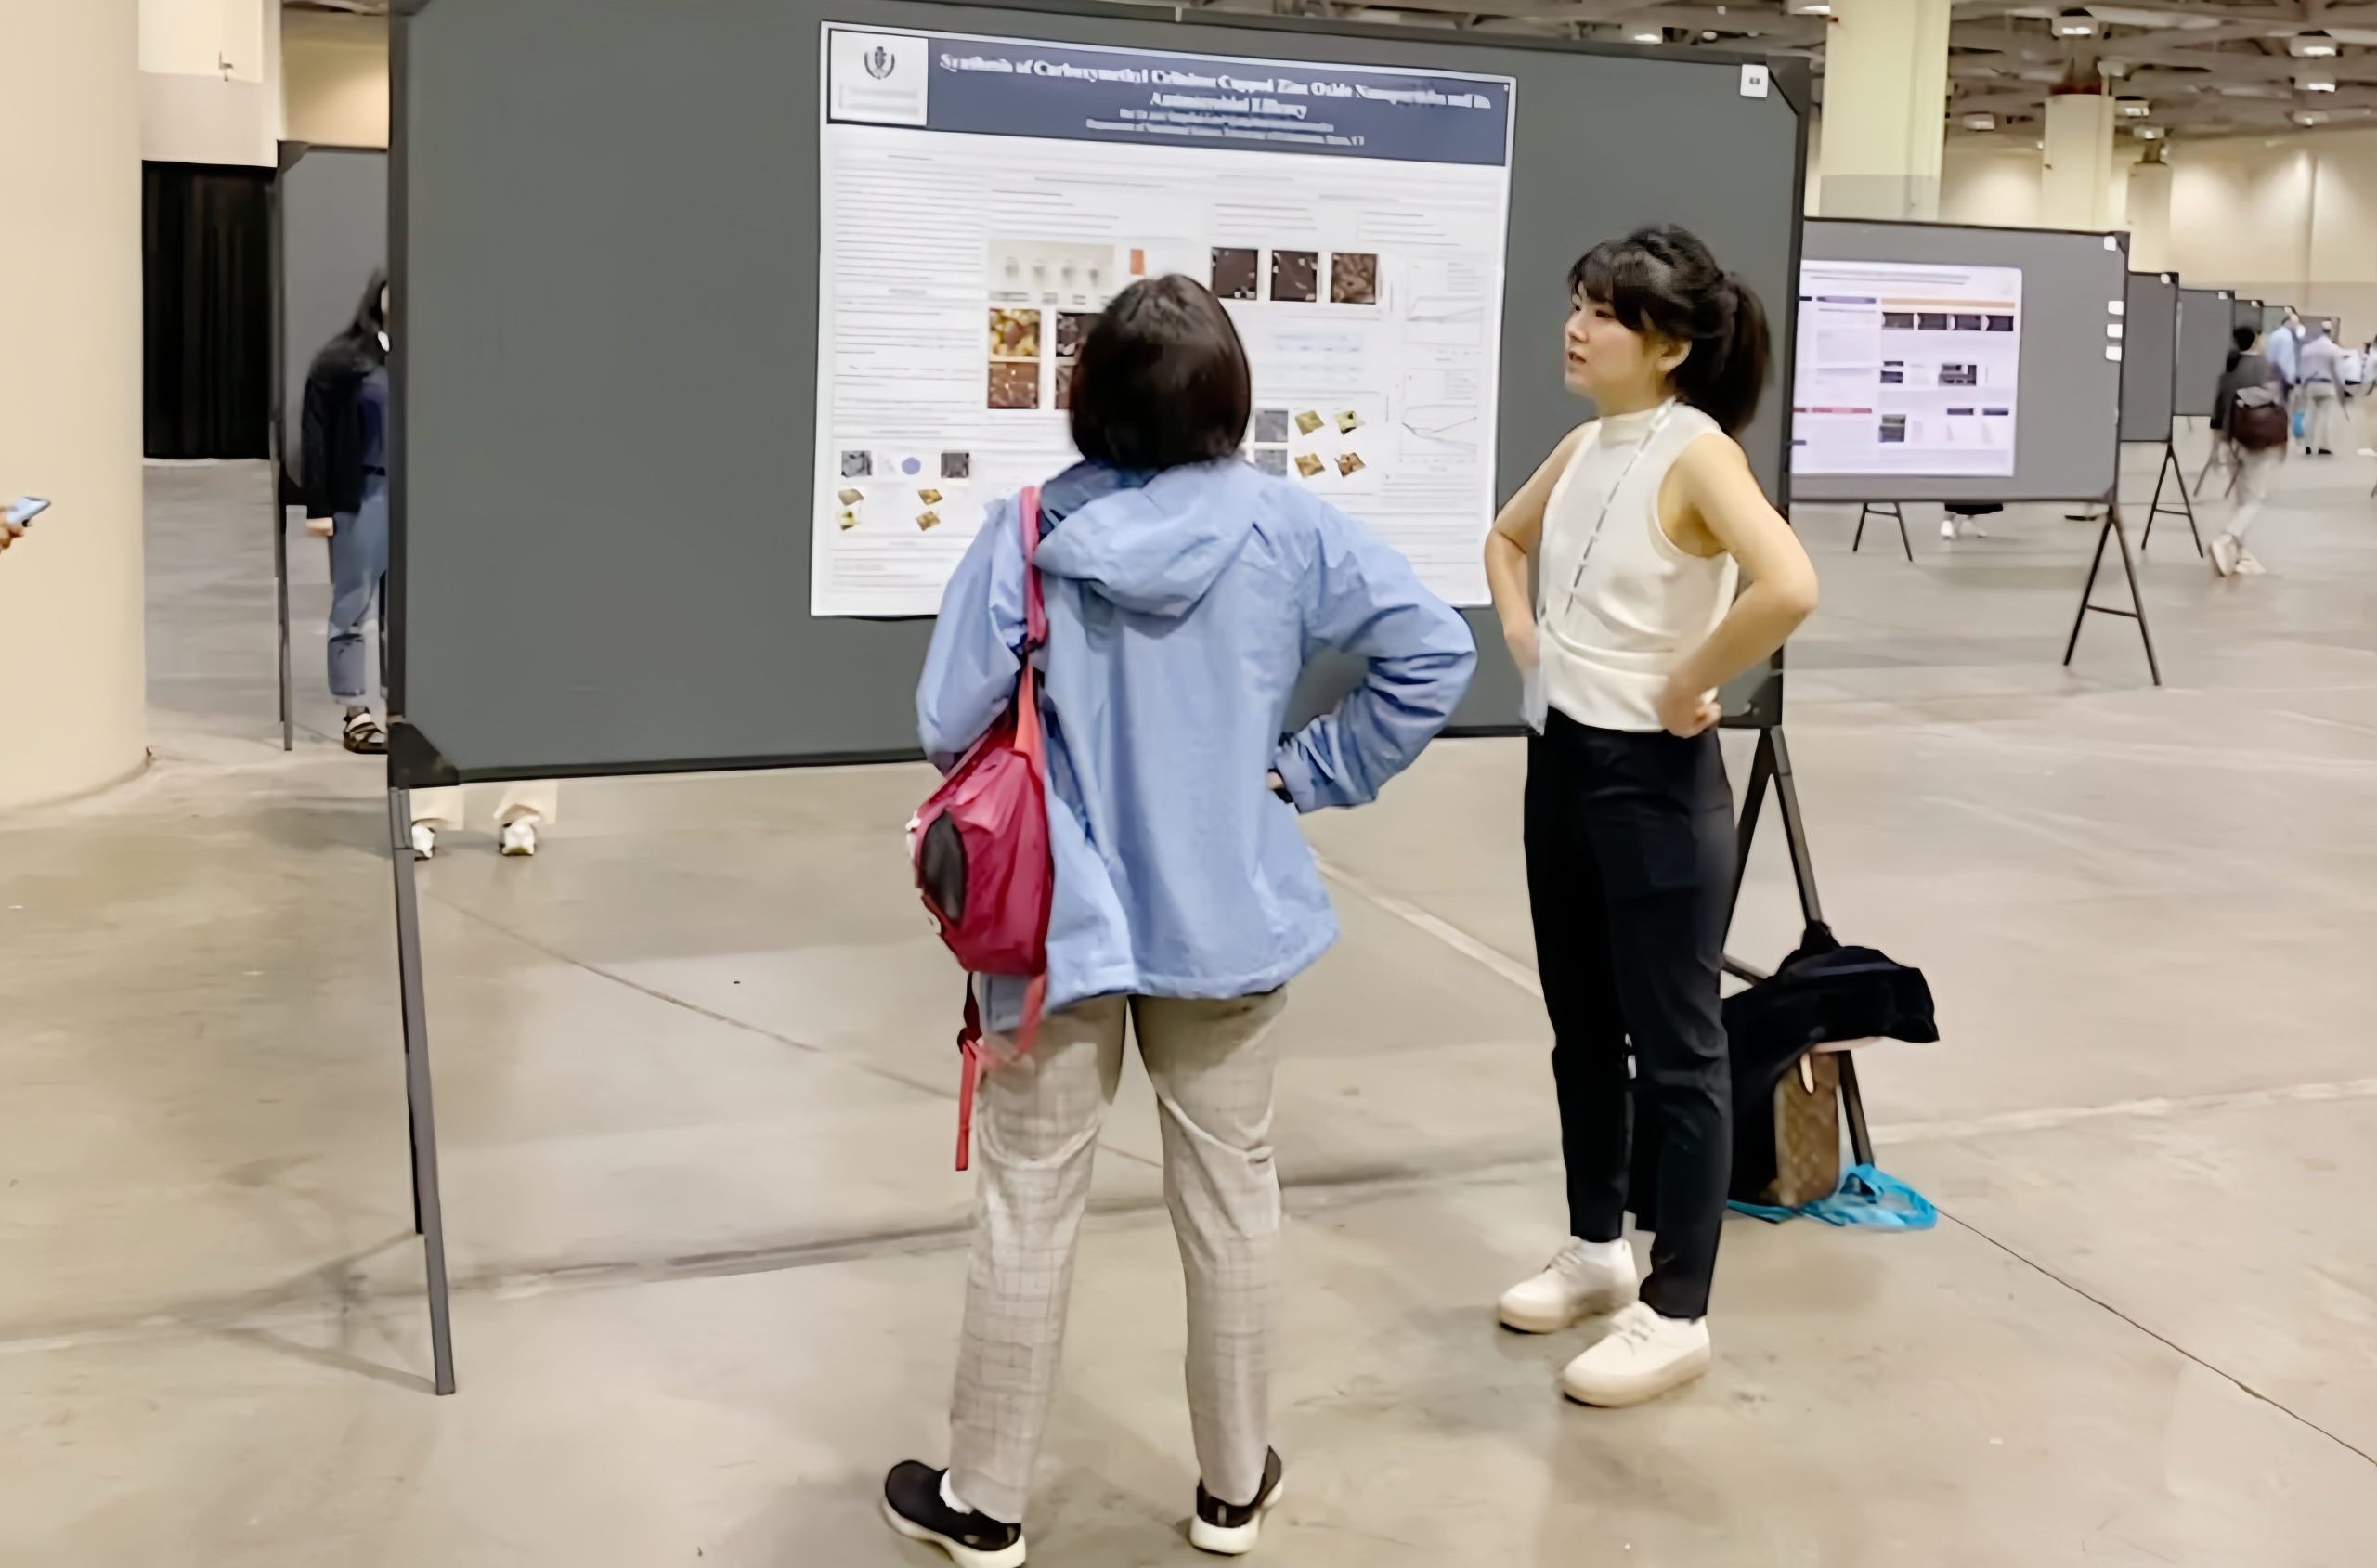 Bai presenting her poster